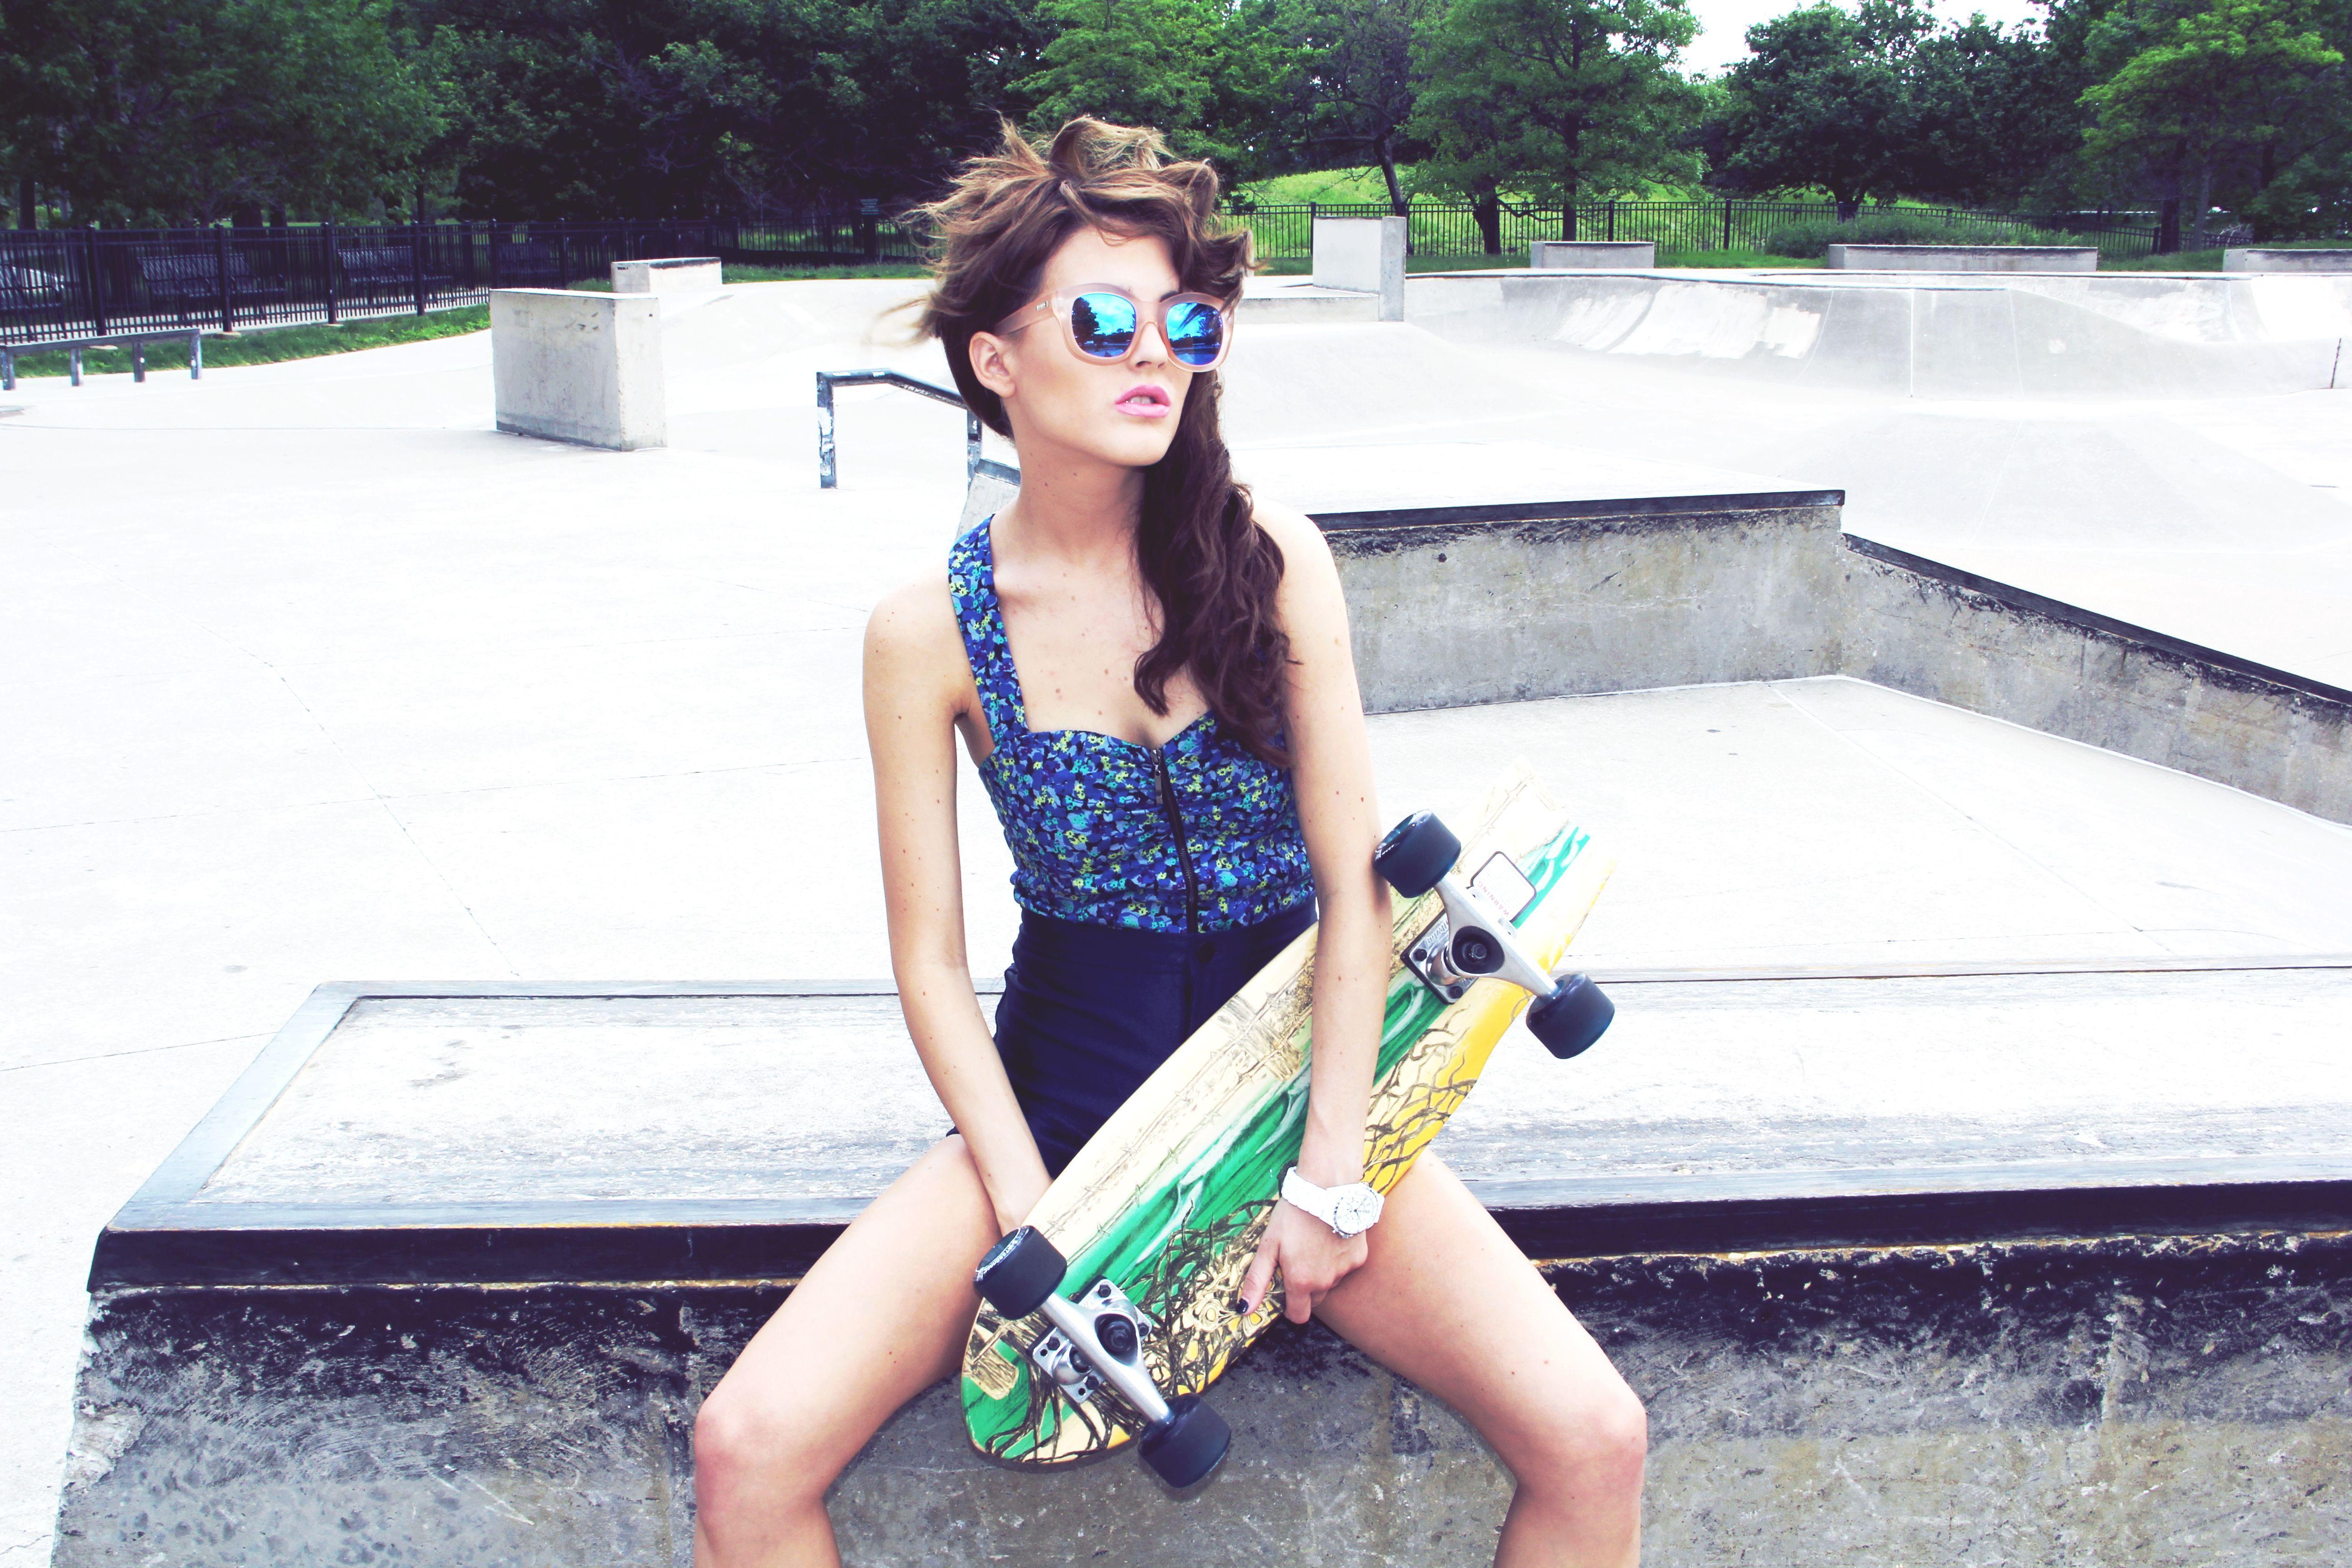 The girl with skateboard, swag wallpaper and image